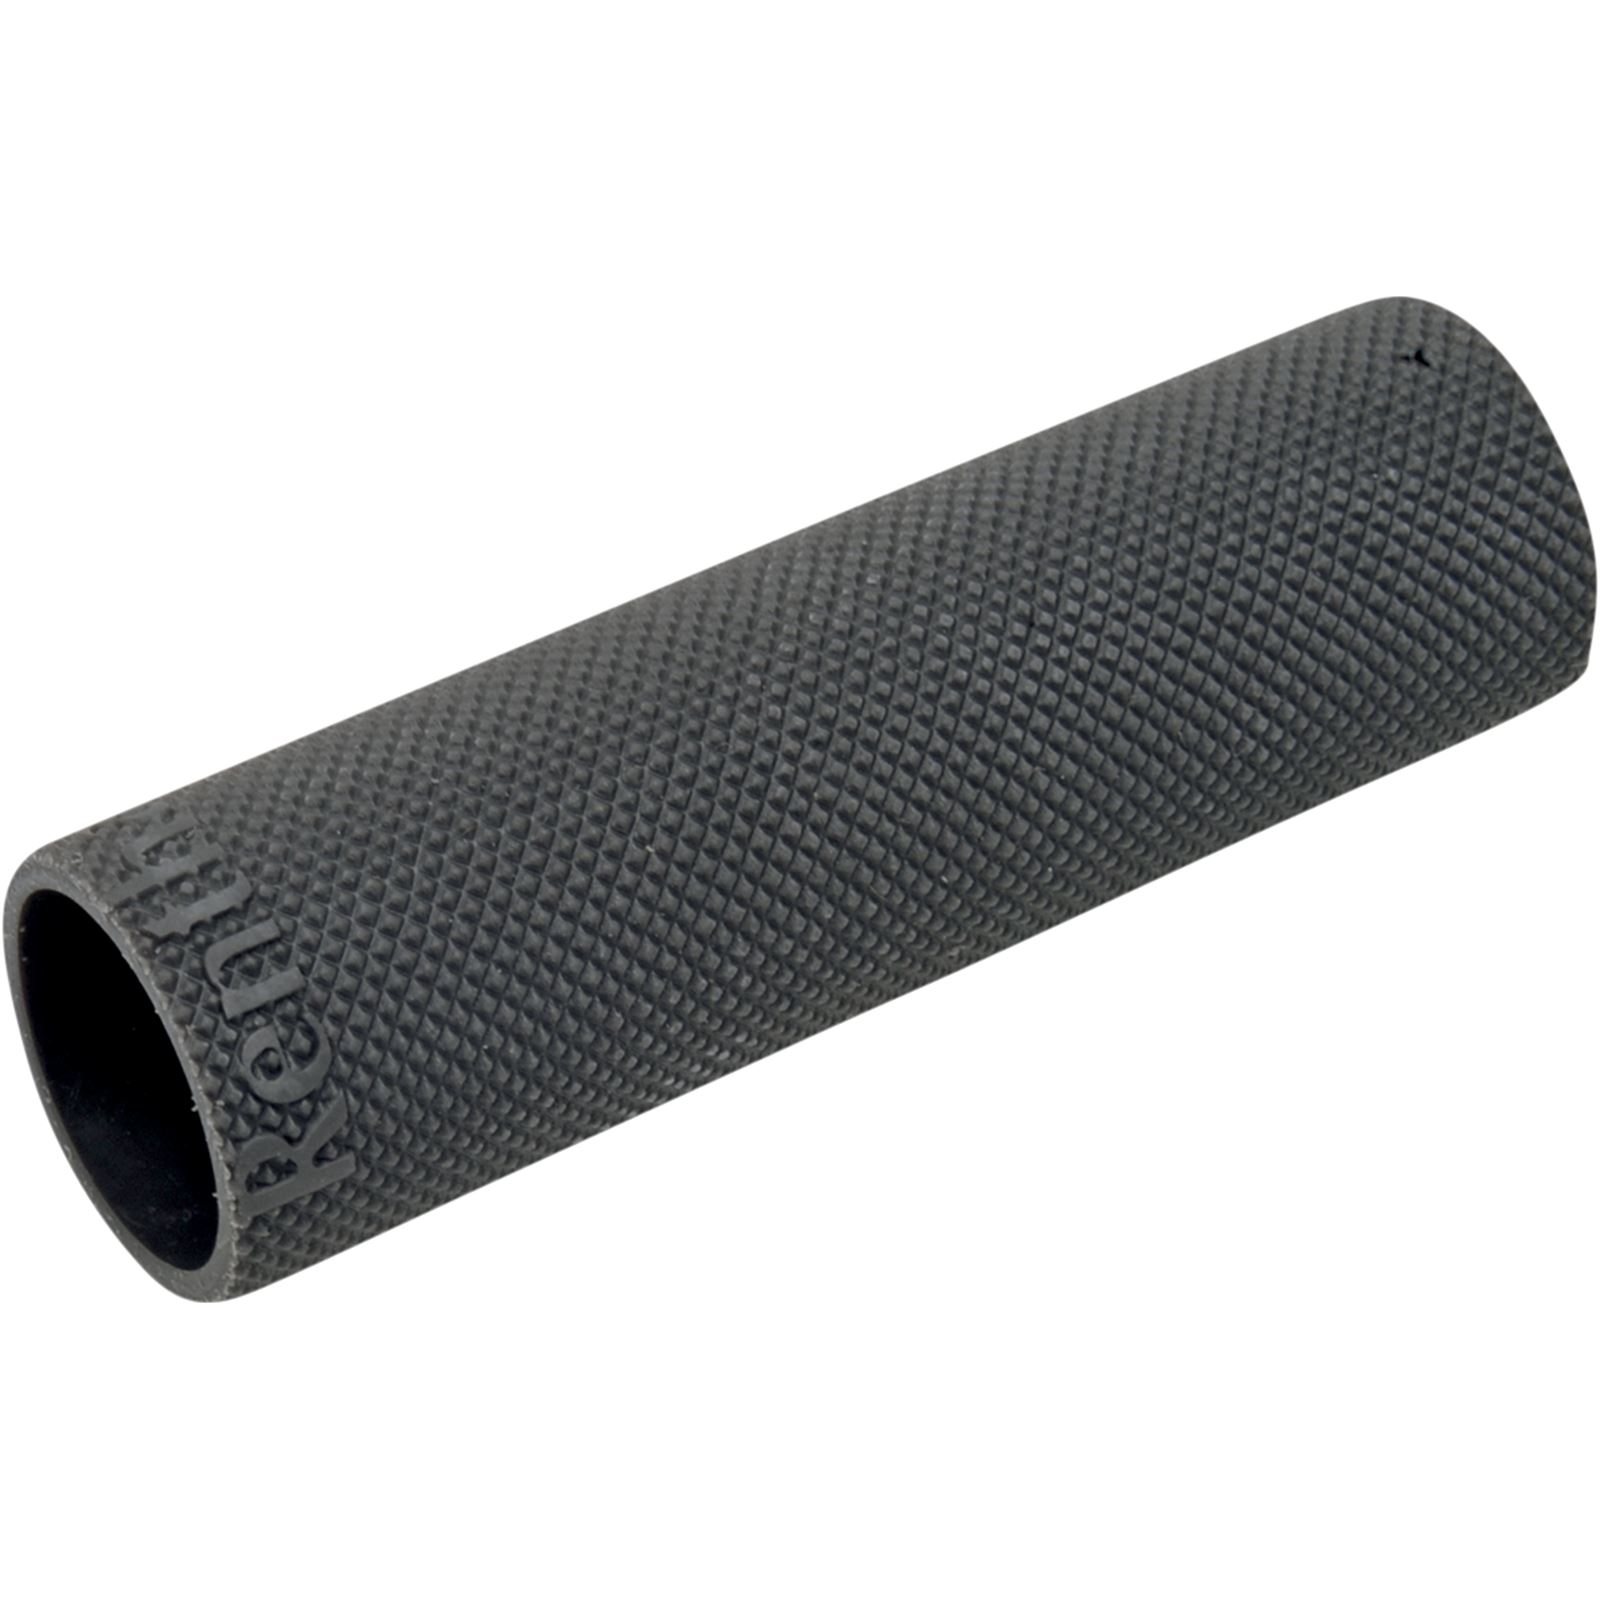 Performance Machine Replacement Rubber Grip